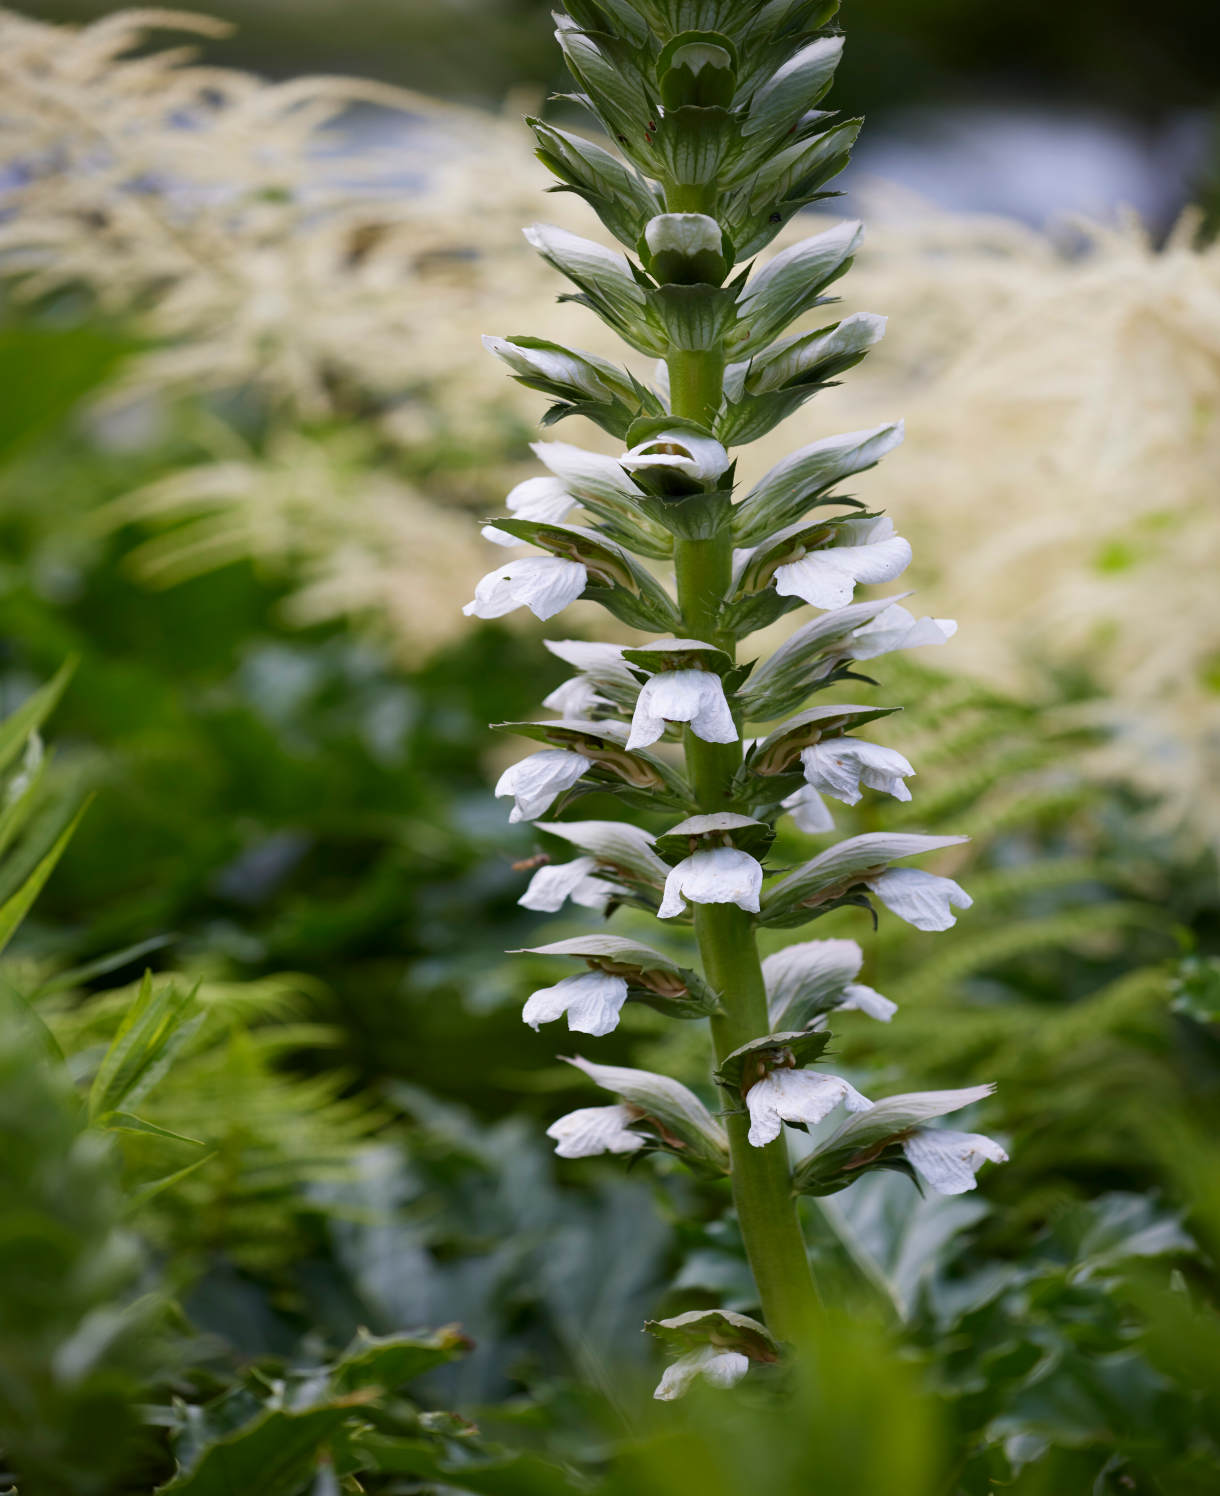 Acanthus_mollis_Rue_Ledan_Visions_visi205578_One_time_use_only_Extended_3.4.23